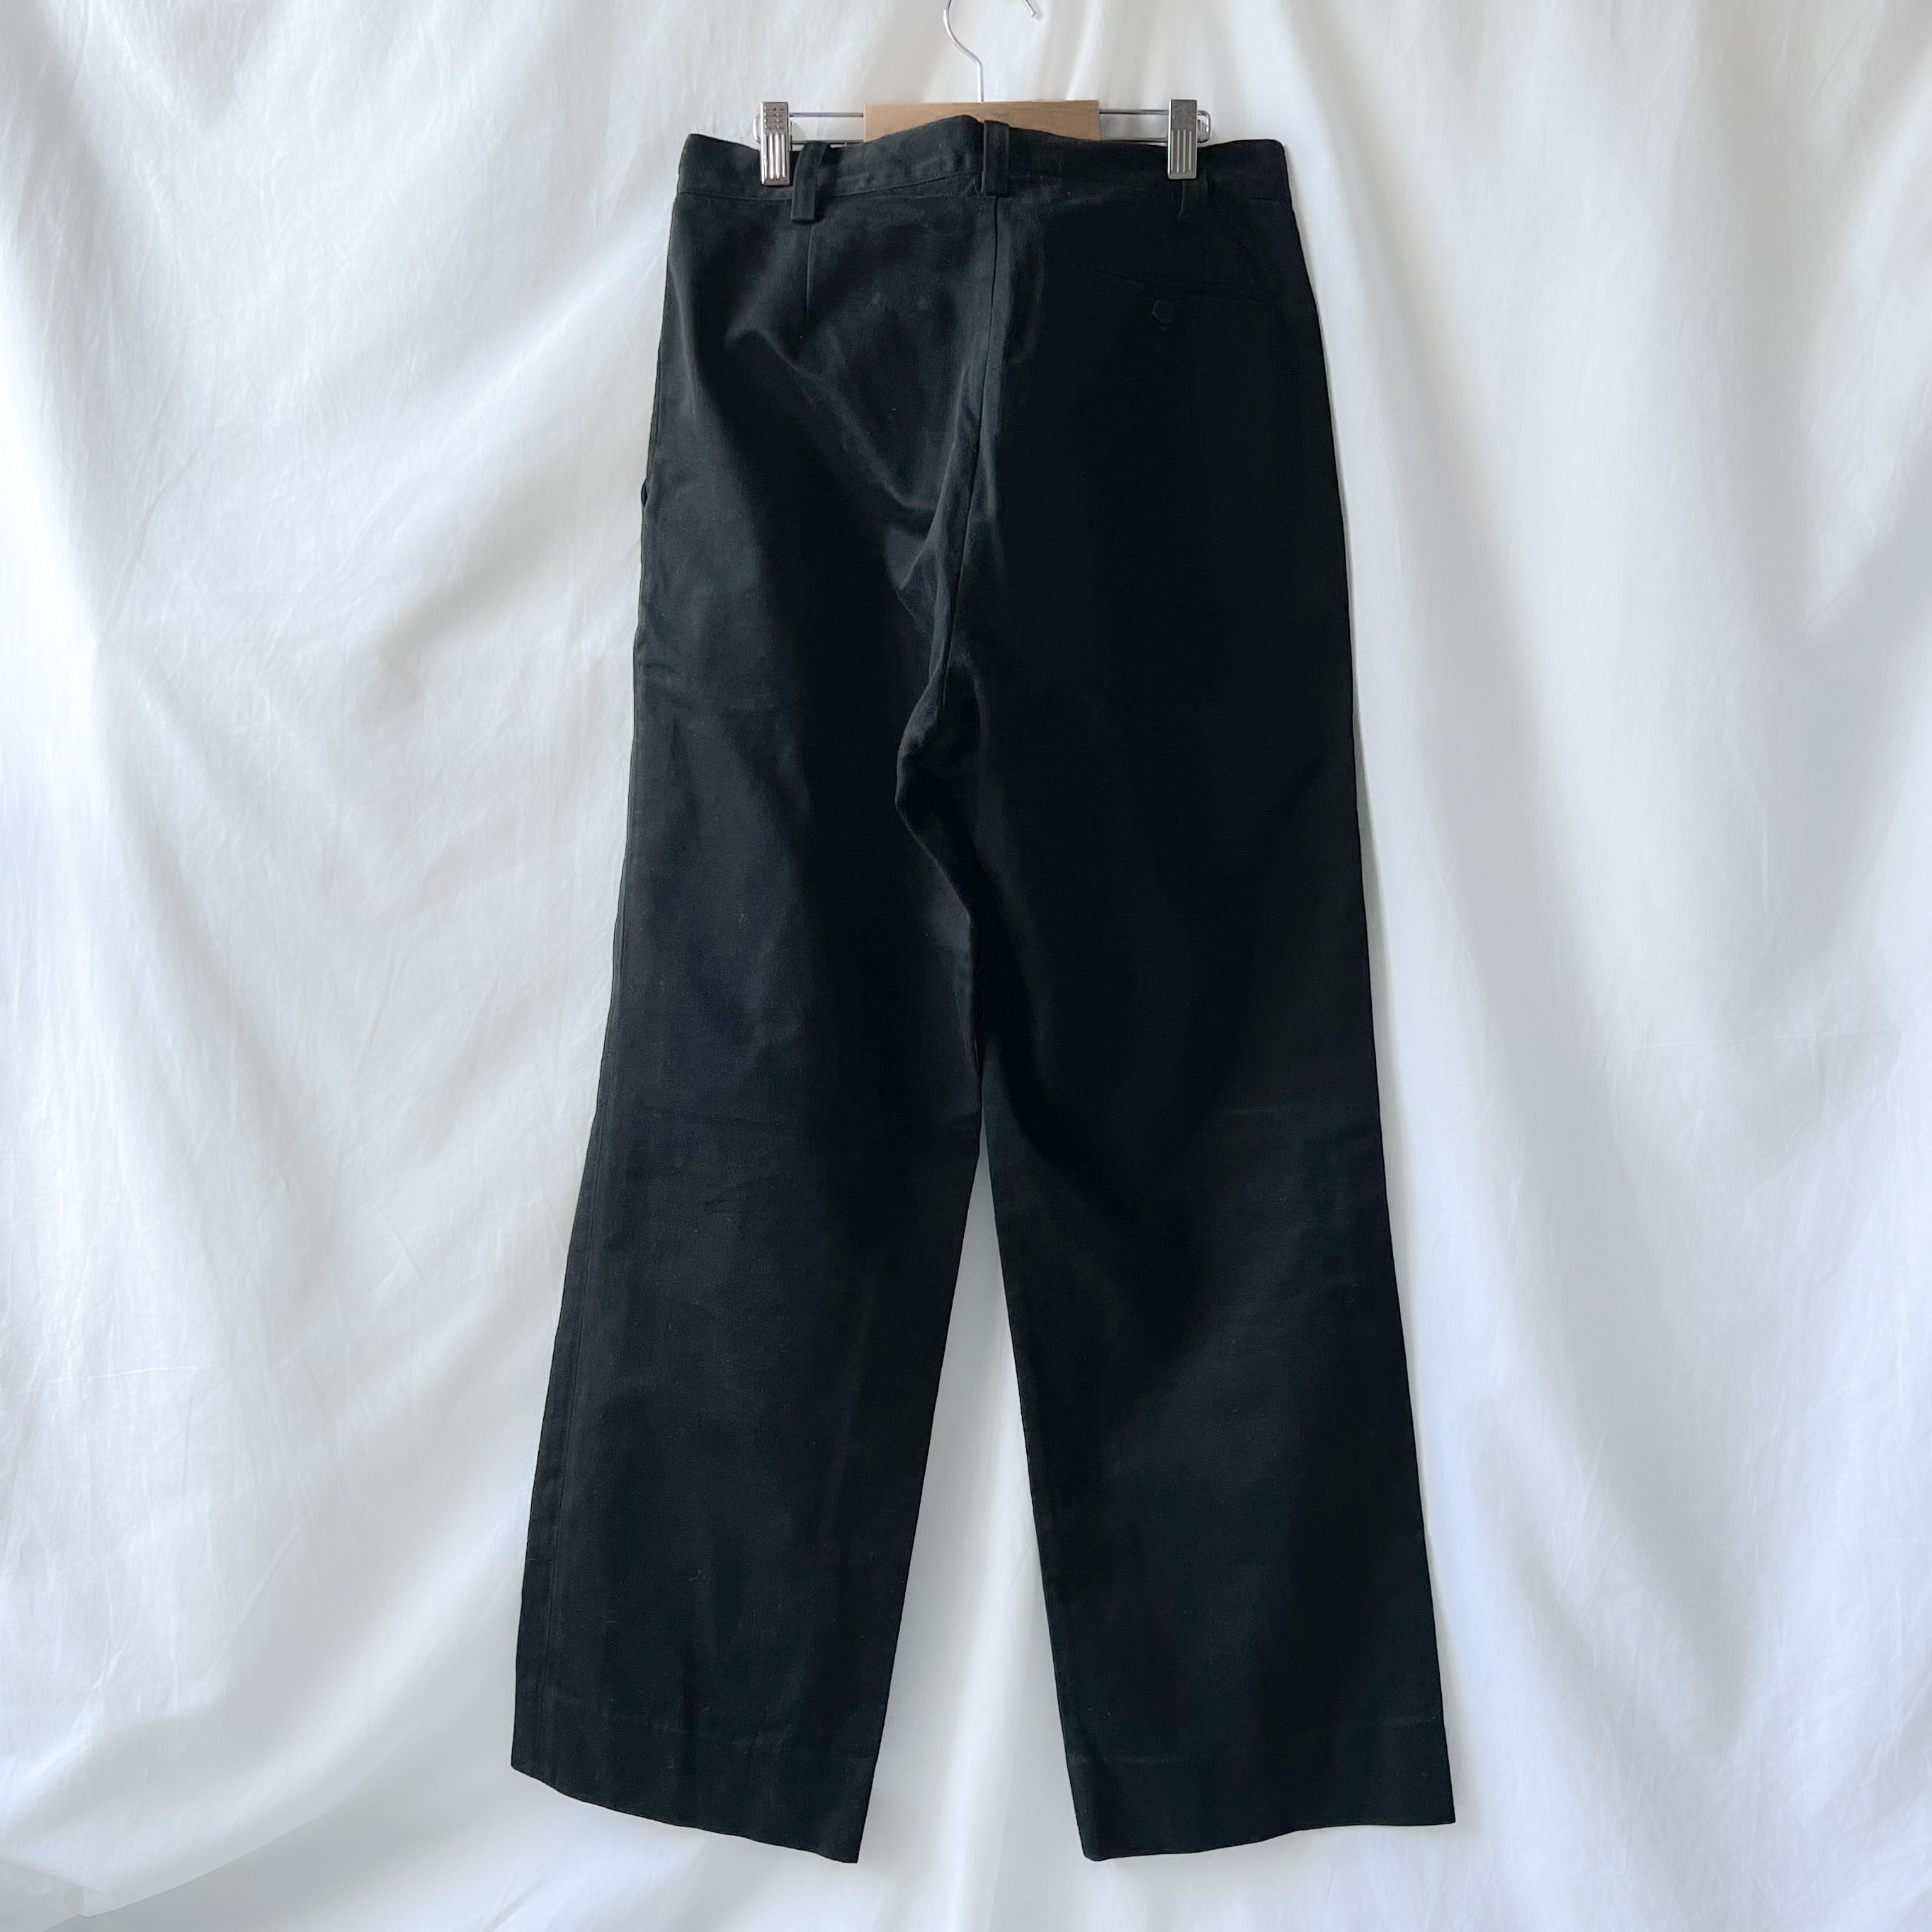 90s “agnes b.” made in france black streat cotton pants アニエスベー 